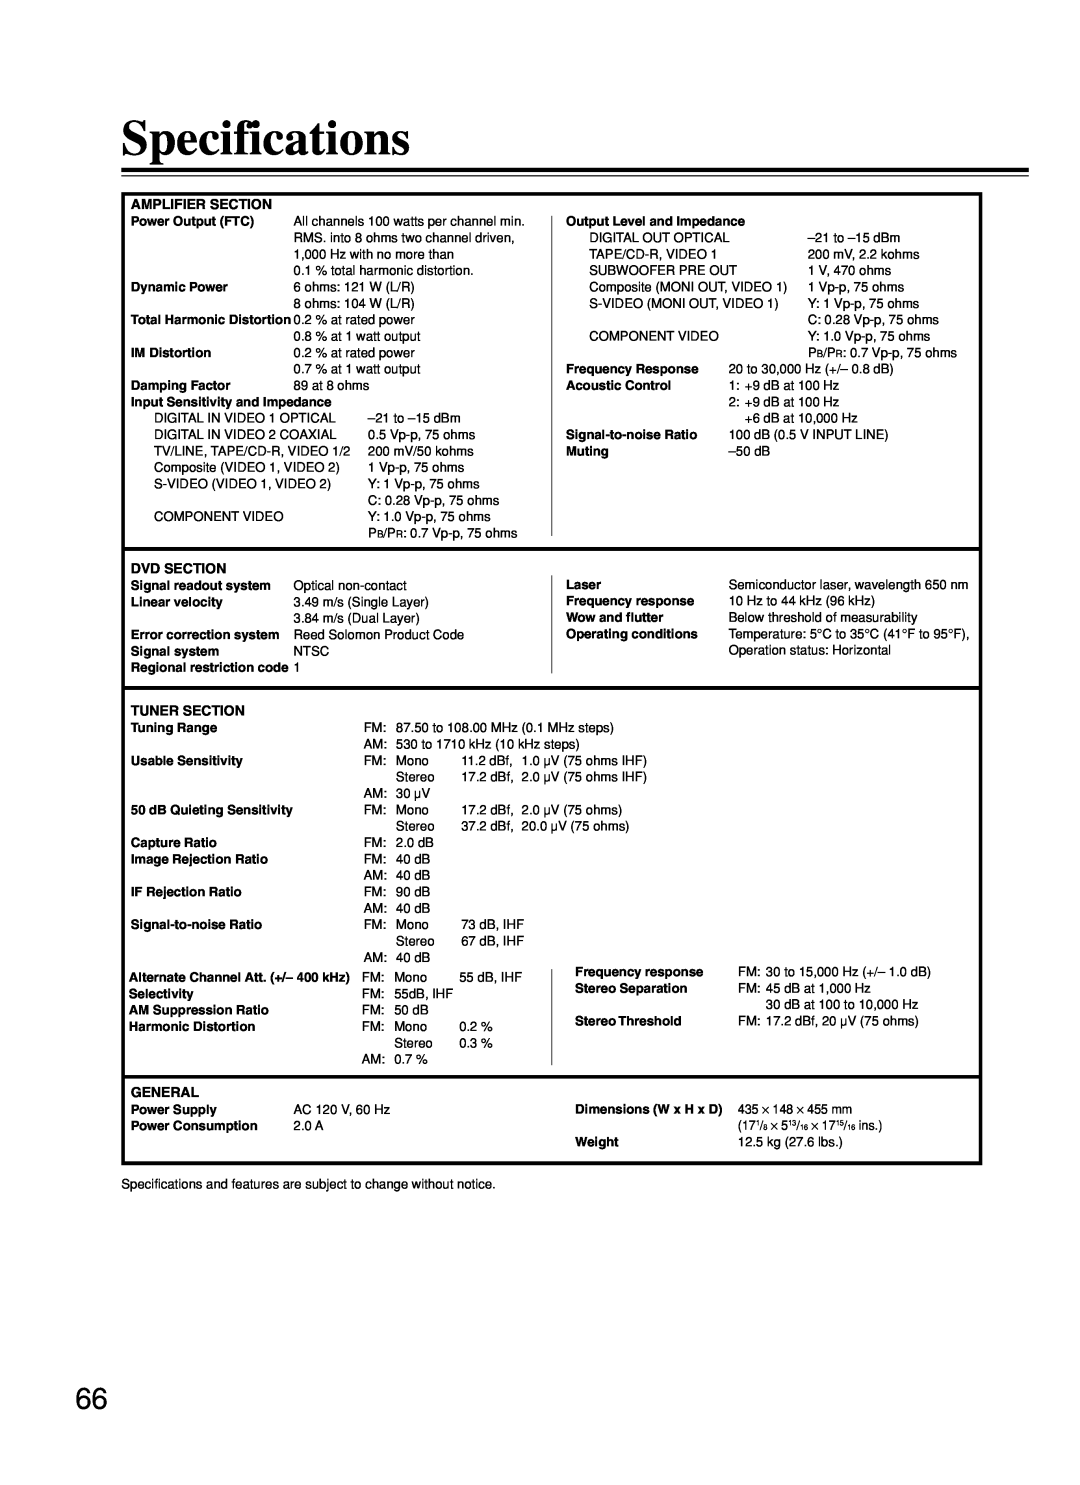 Onkyo DR-C500 instruction manual Specifications 